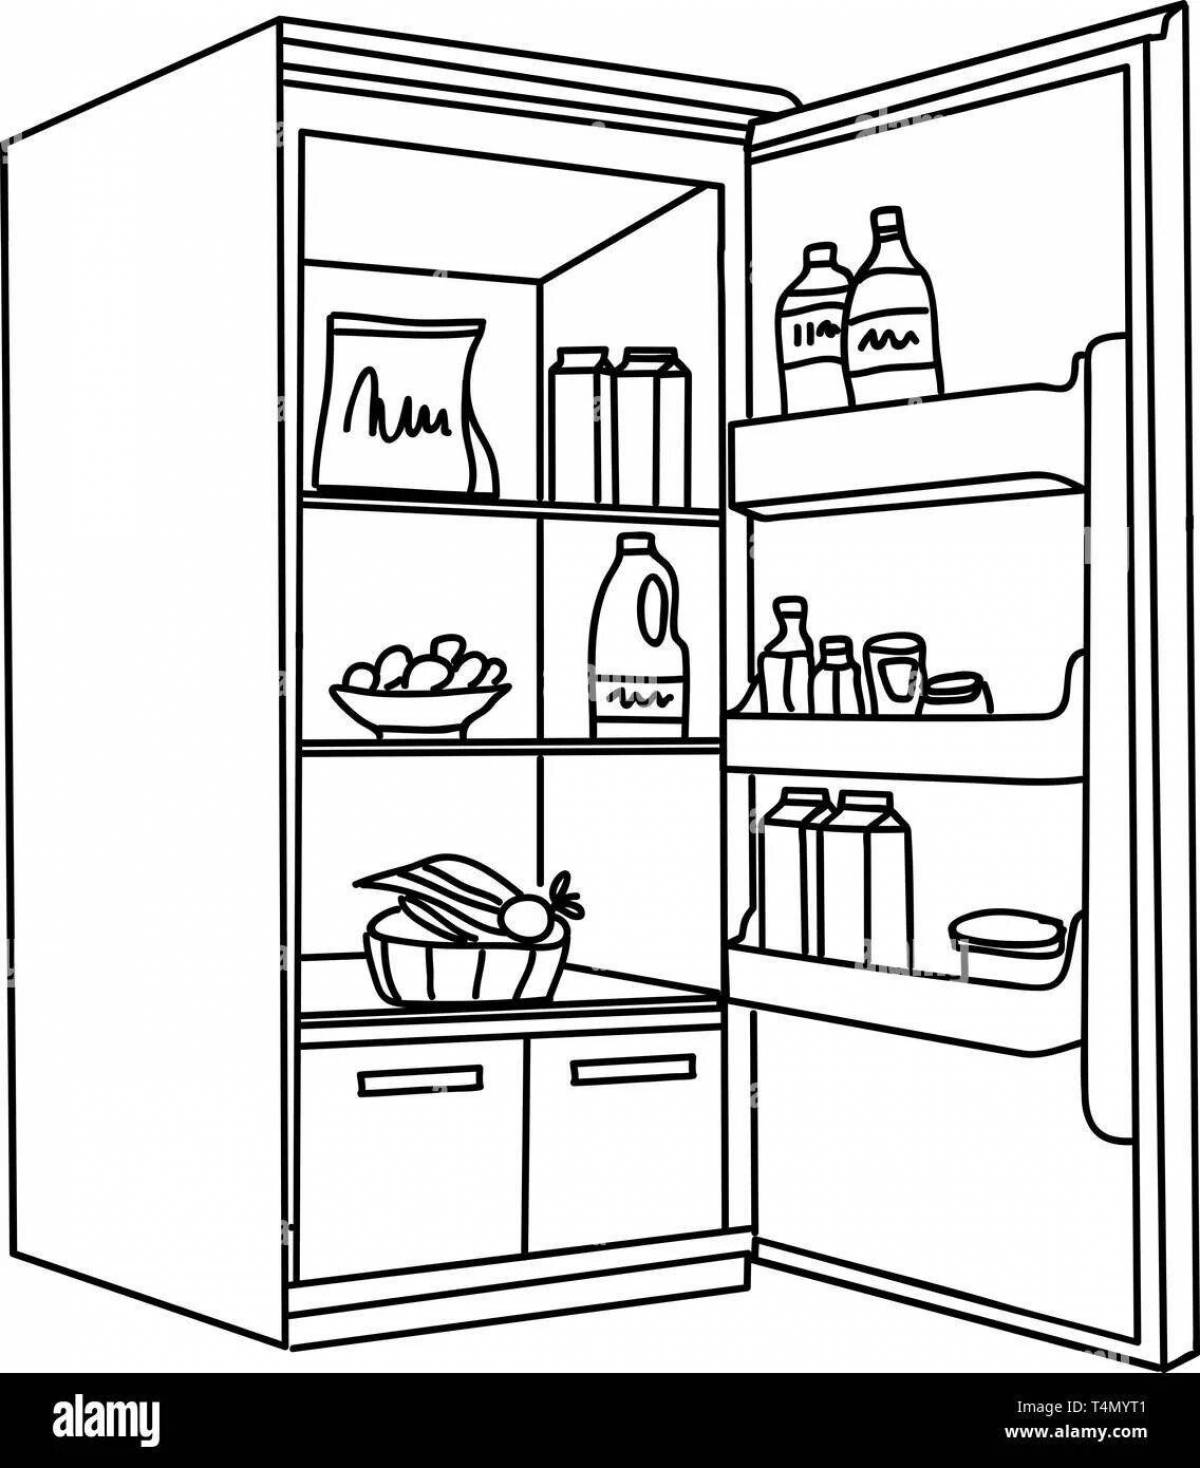 An animated coloring page with an empty refrigerator